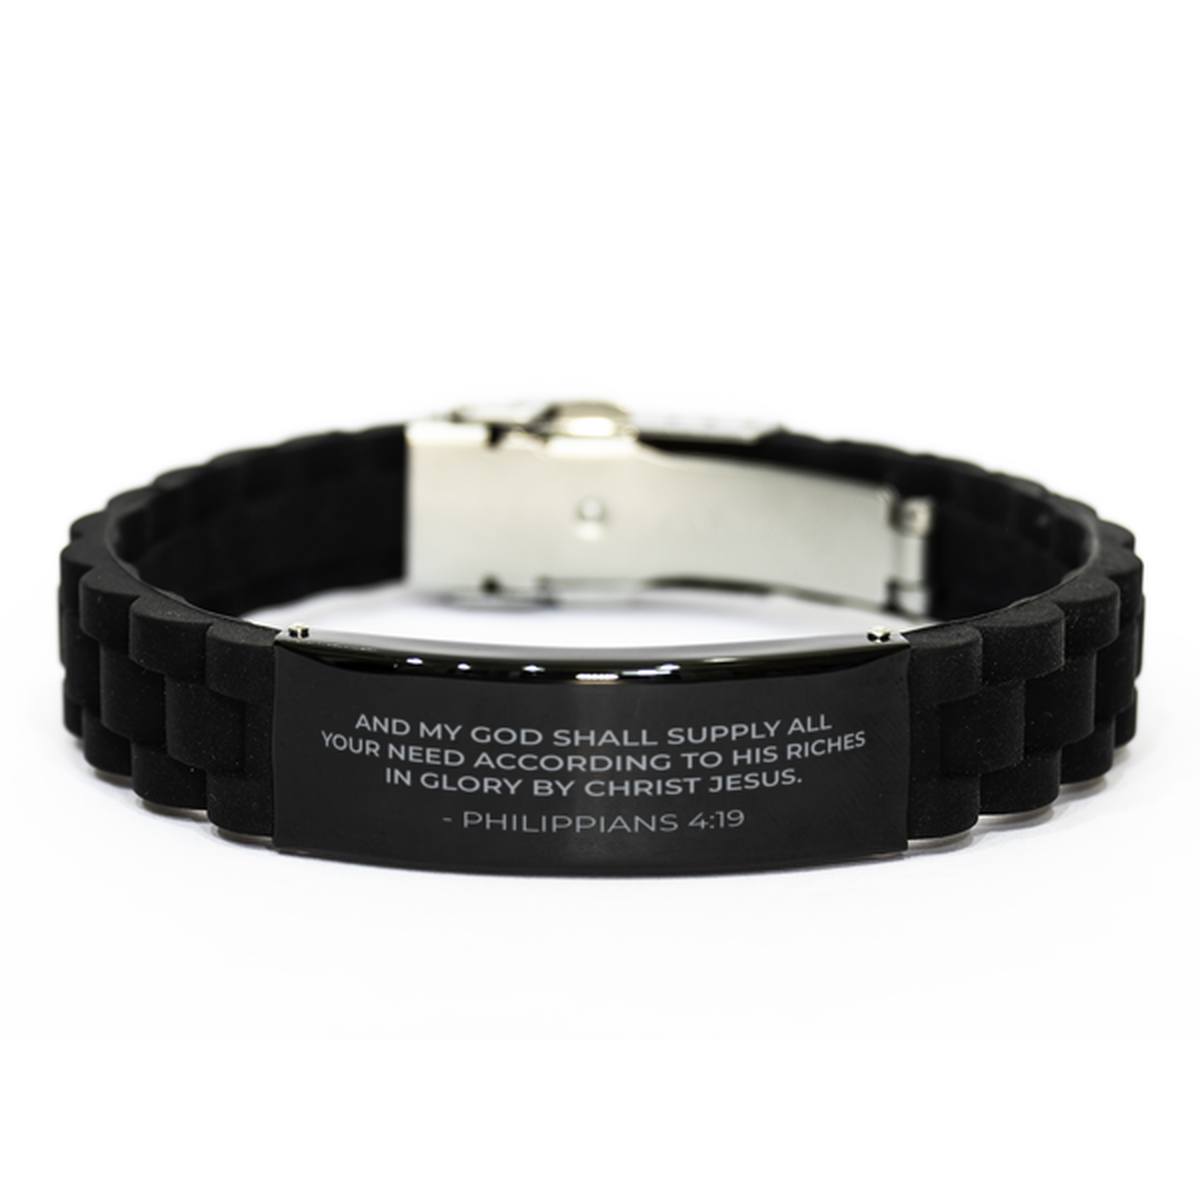 Bible Verse Black Bracelet,, Philippians 4:19 And My God Shall Supply All Your Need According, Inspirational Christian Gifts For Men Women